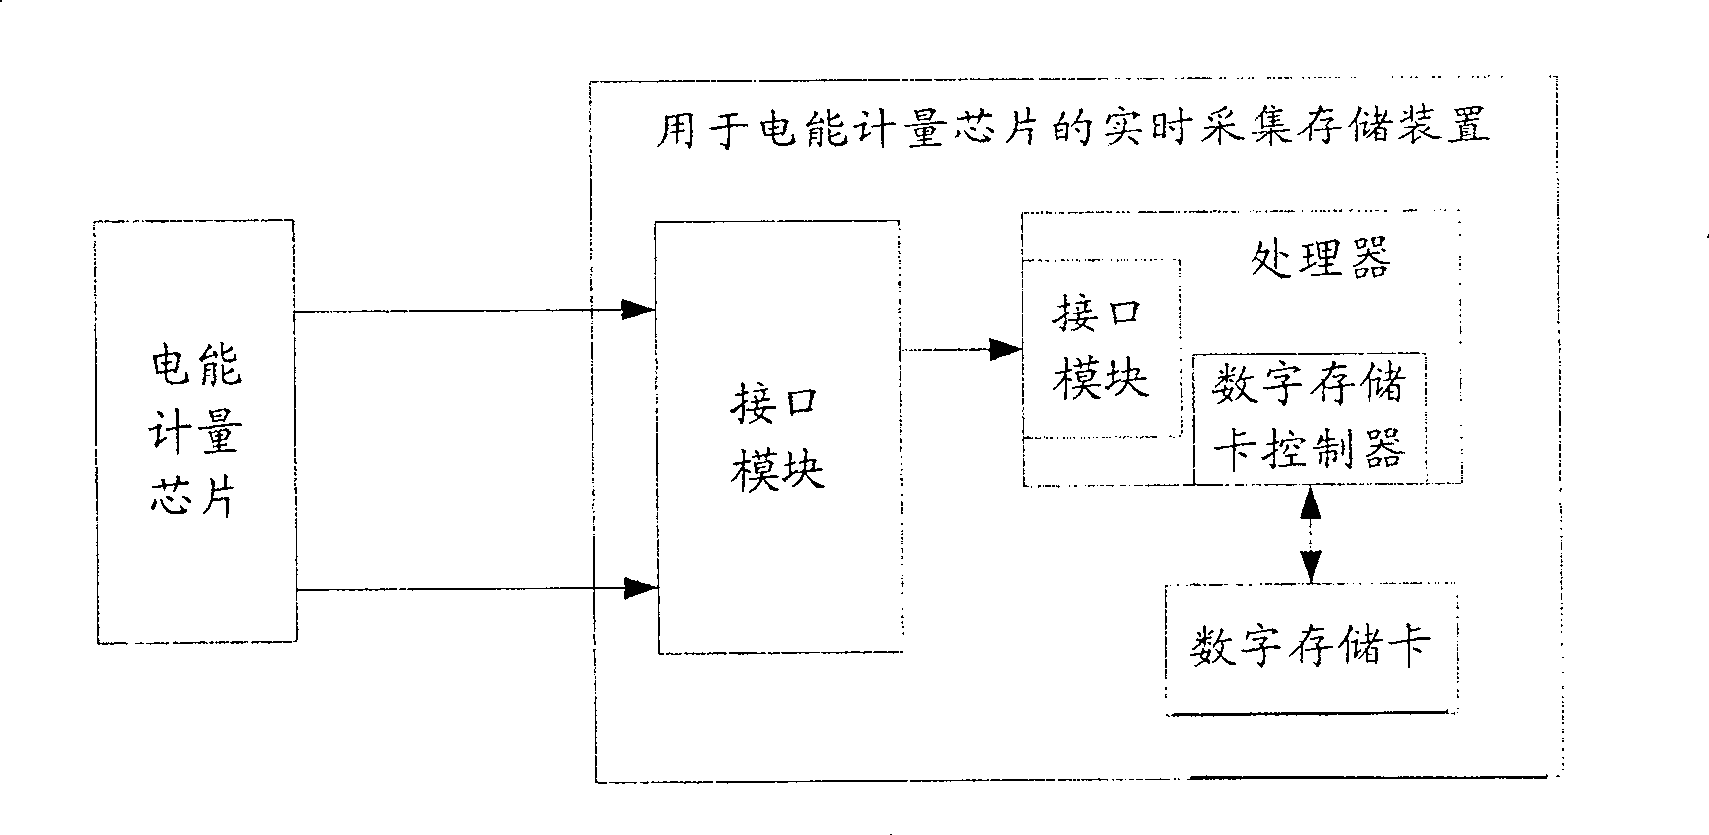 Real time collection storage apparatus used for electric energy computation chip